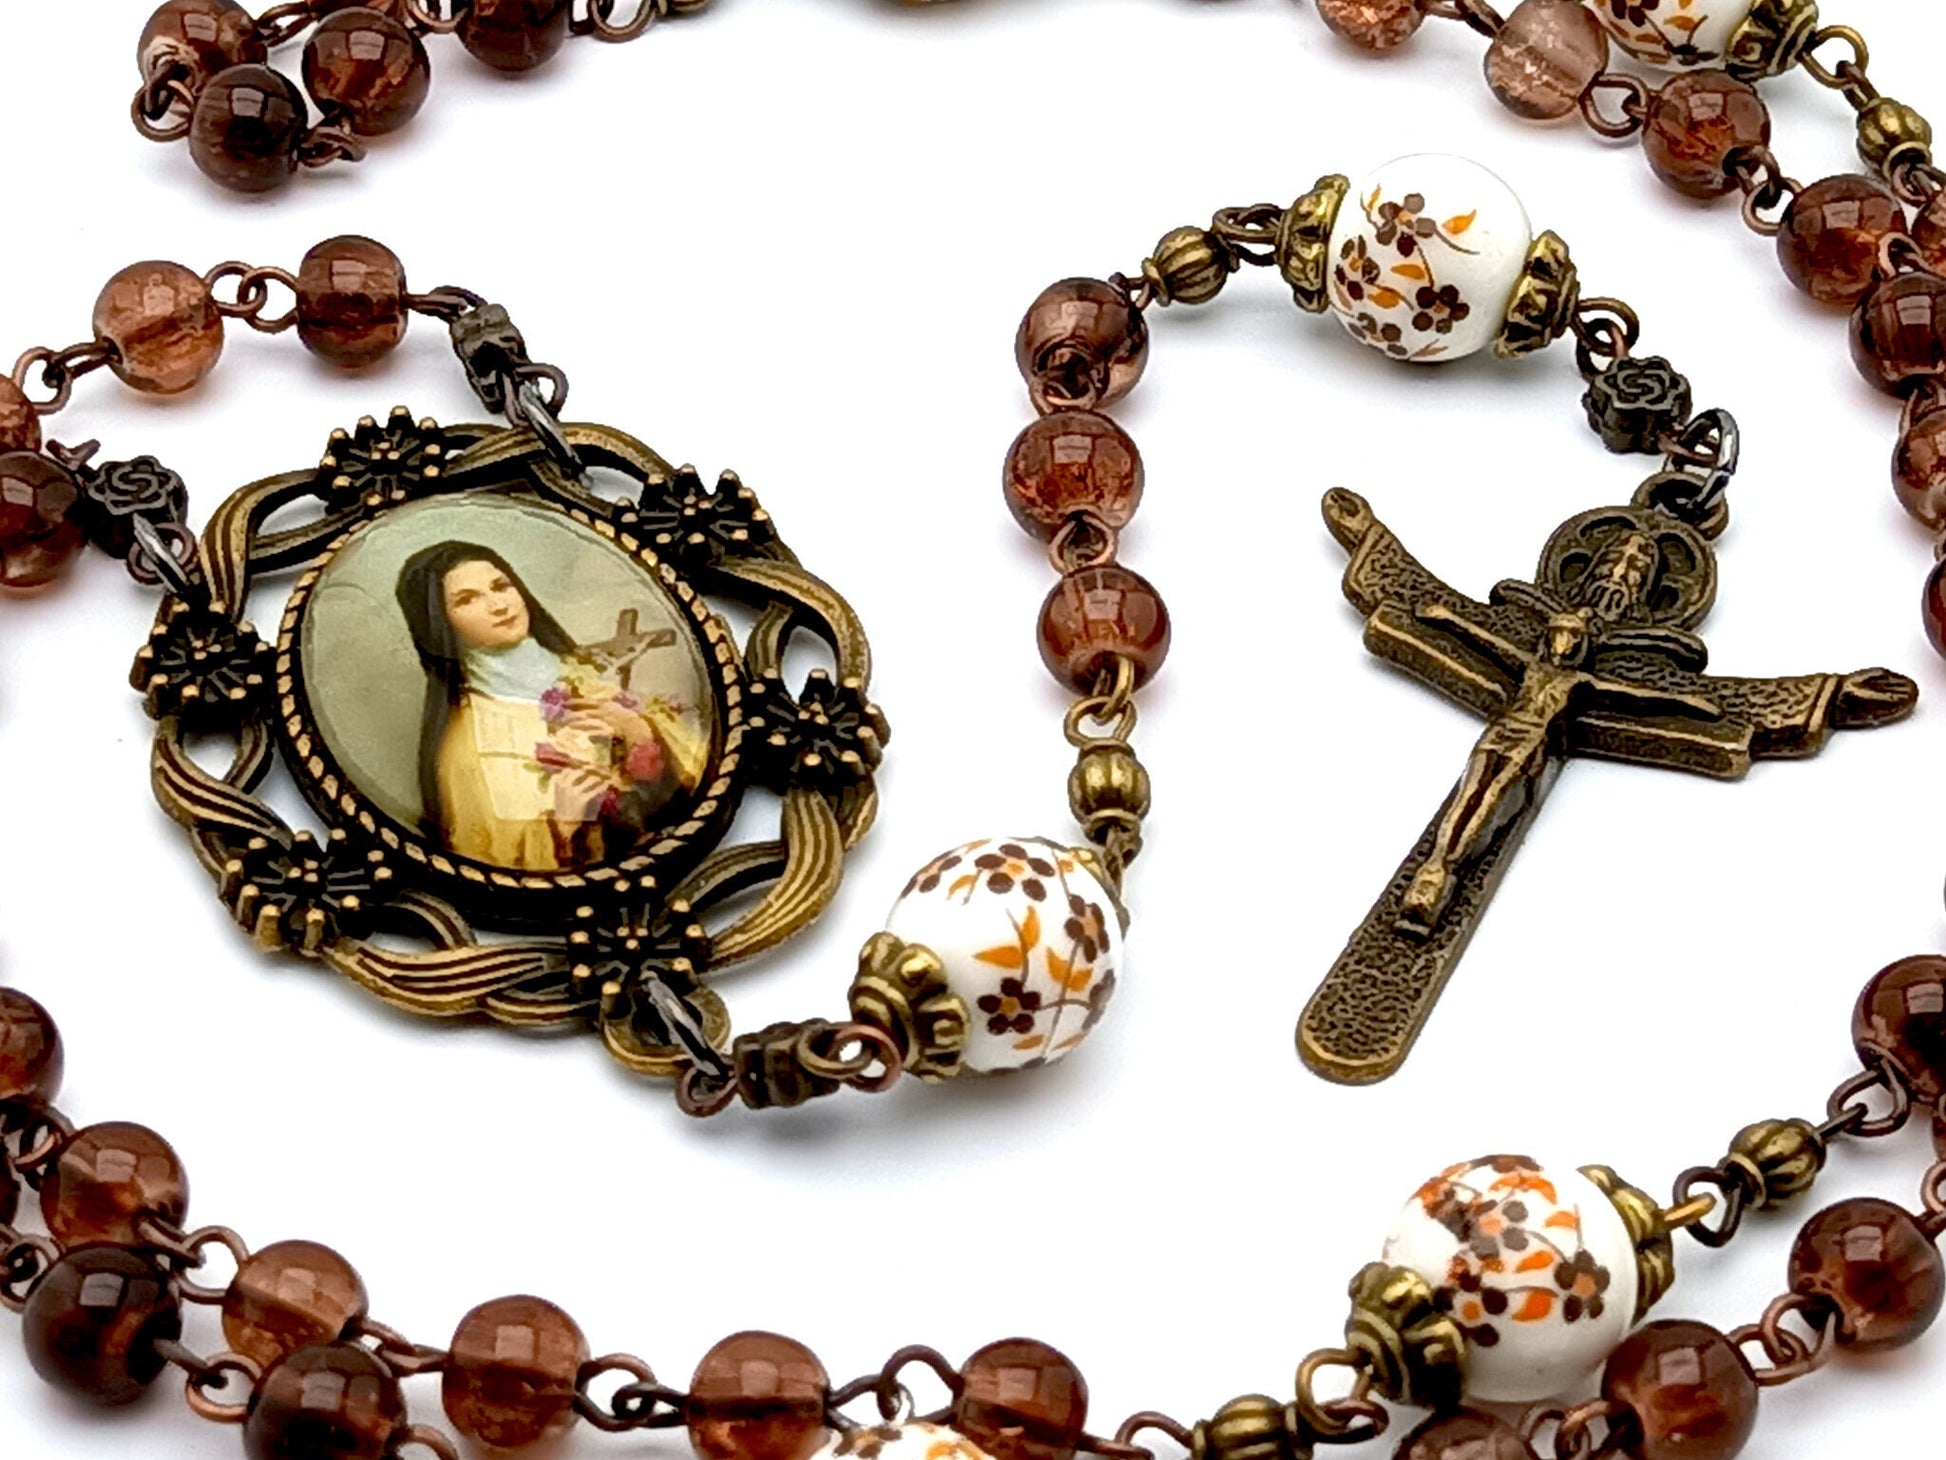 Saint Therese unique rosary beads with dark red glass and floral porcelain beads, bronze Holy Trinity crucifix and  picture centre medal.